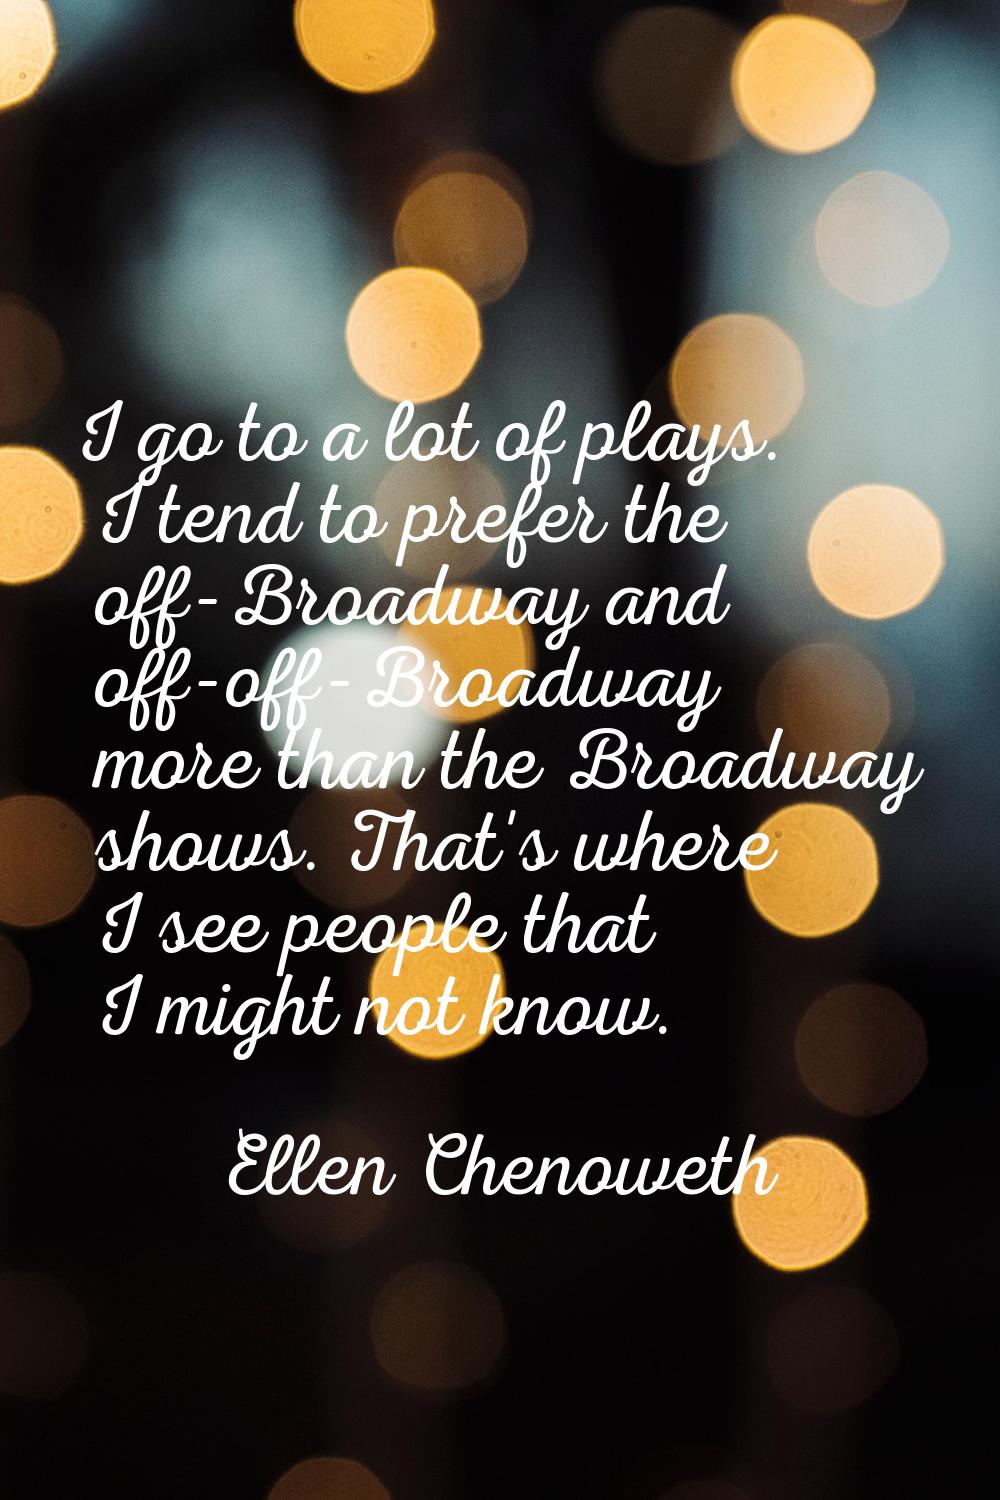 I go to a lot of plays. I tend to prefer the off-Broadway and off-off-Broadway more than the Broadw